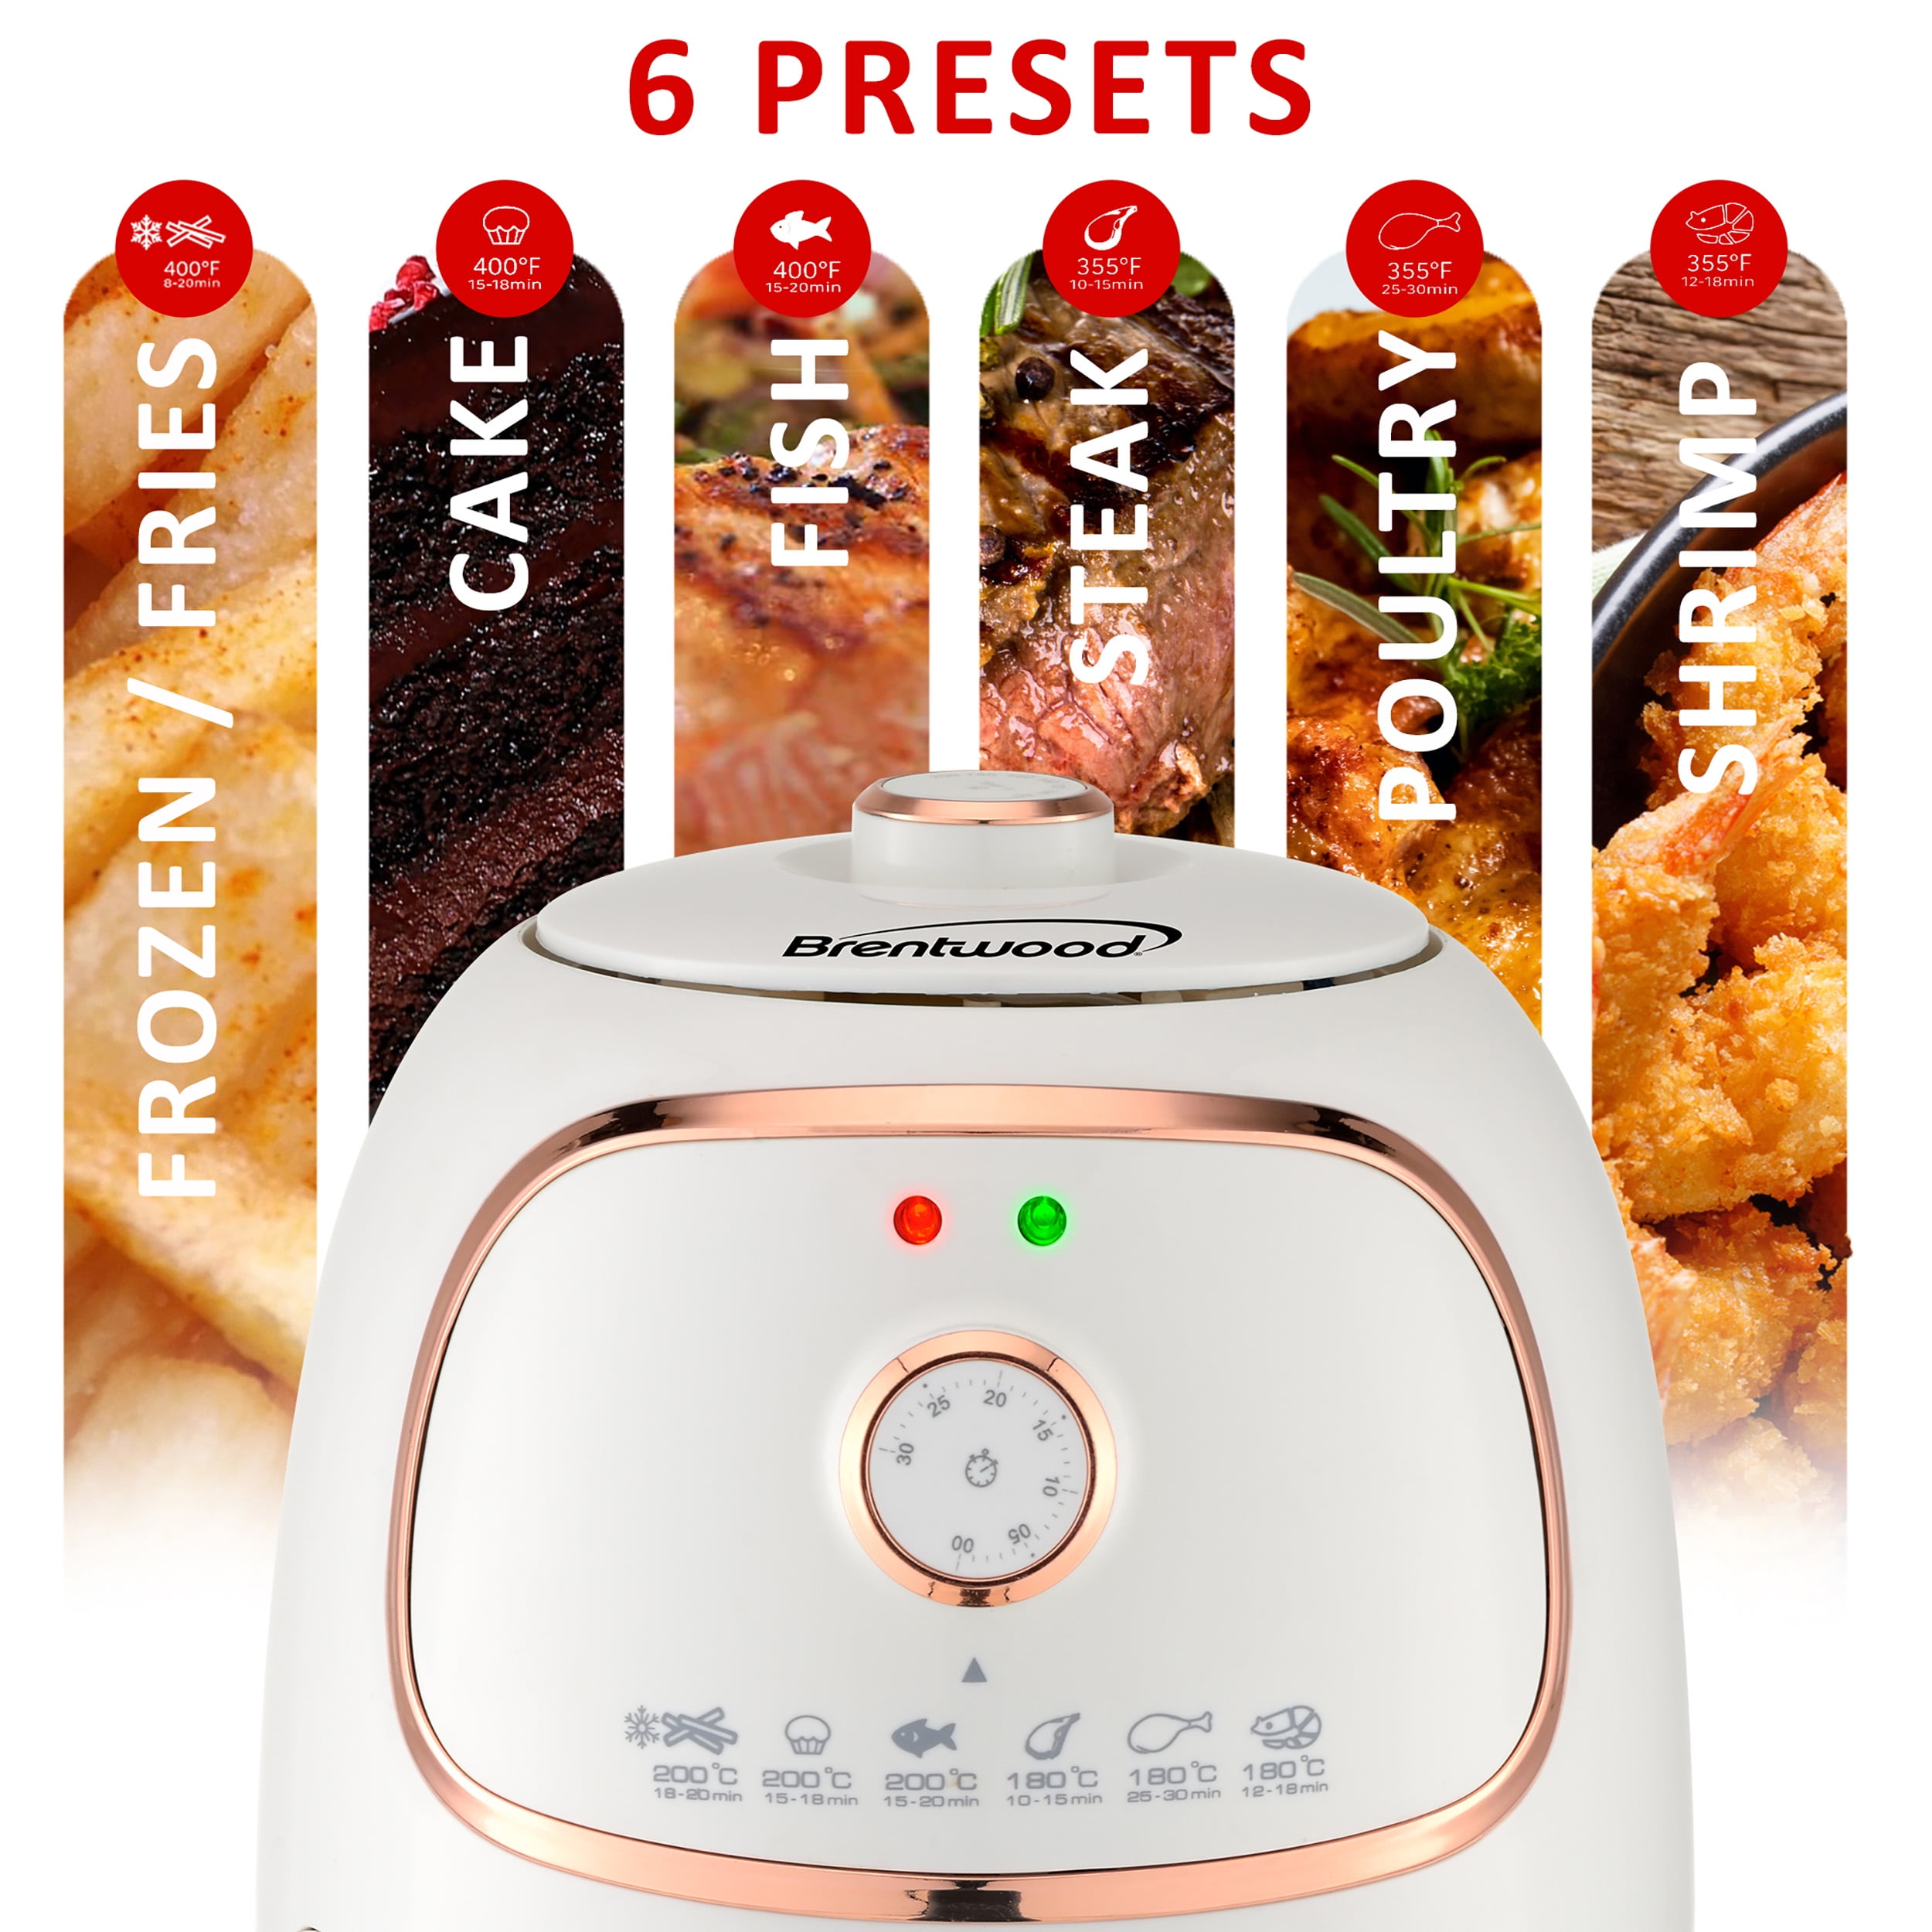 YOMA Air Fryer, 2.6 Qt Small Airfryer with Temperature,1200 Watt